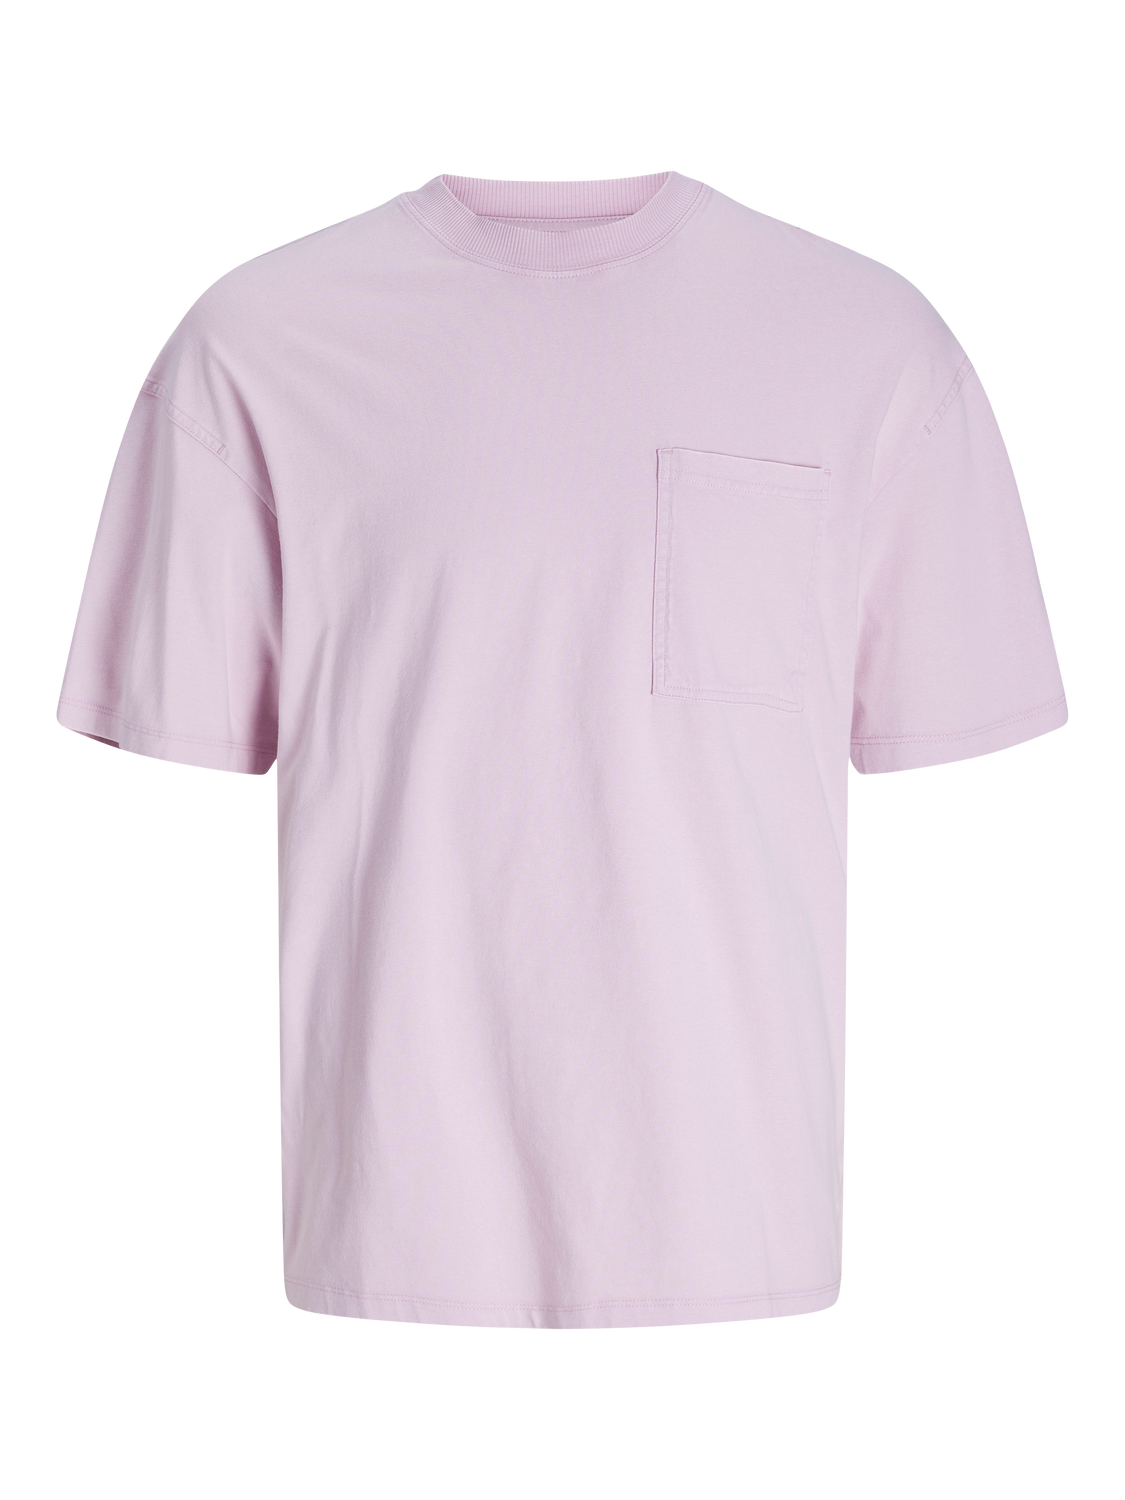 Jack & Jones Wide Fit Round Neck T-Shirt -Winsome Orchid - 12256314